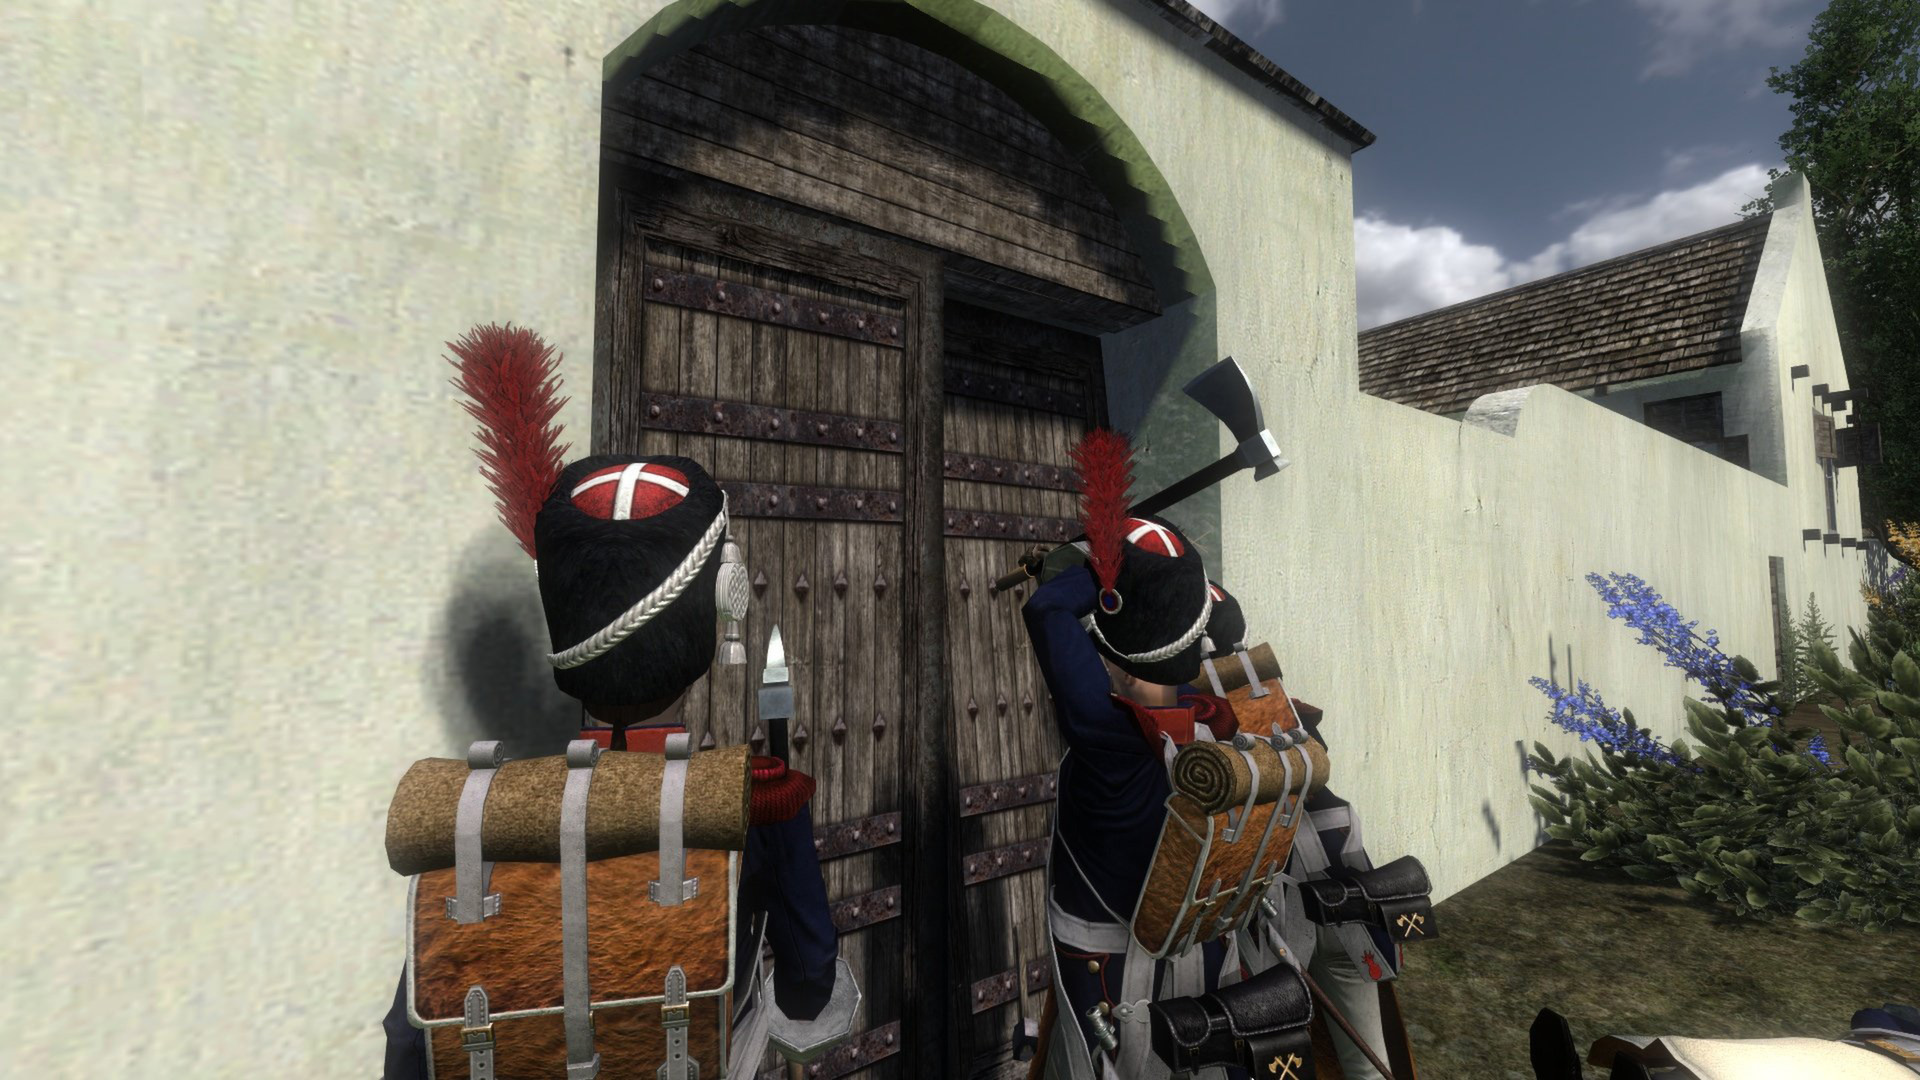 mount and blade napoleonic wars download 1.2